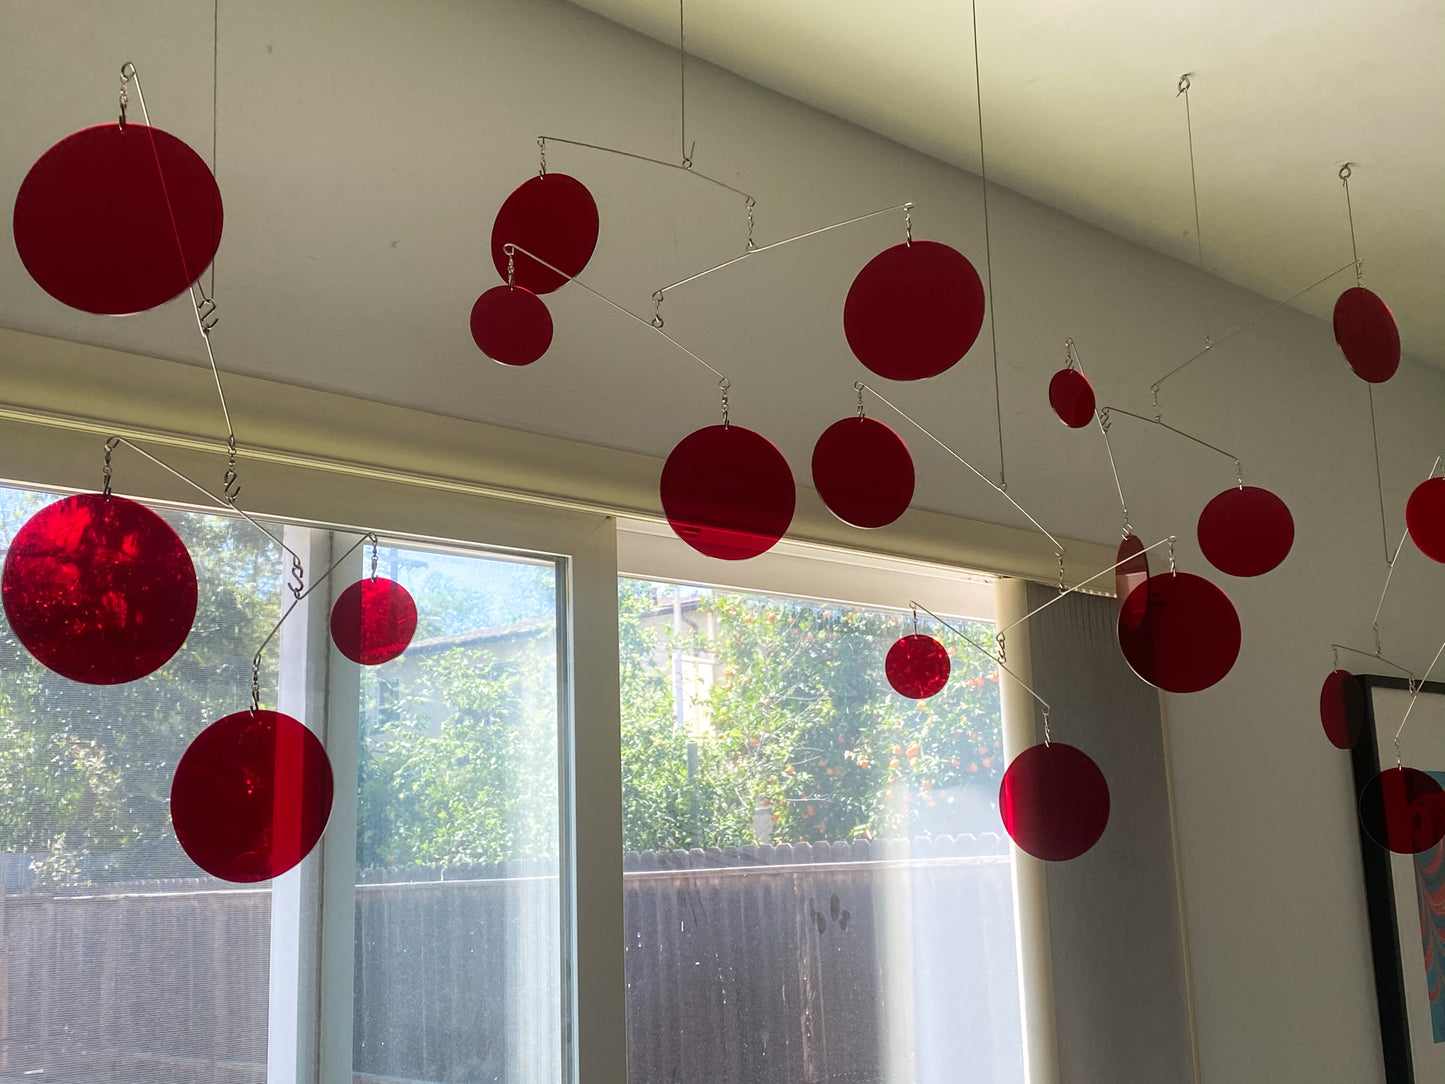 Clear Red Reflective Atomic Mobiles in bedroom overlooking trees in backyard by AtomicMobiles.com